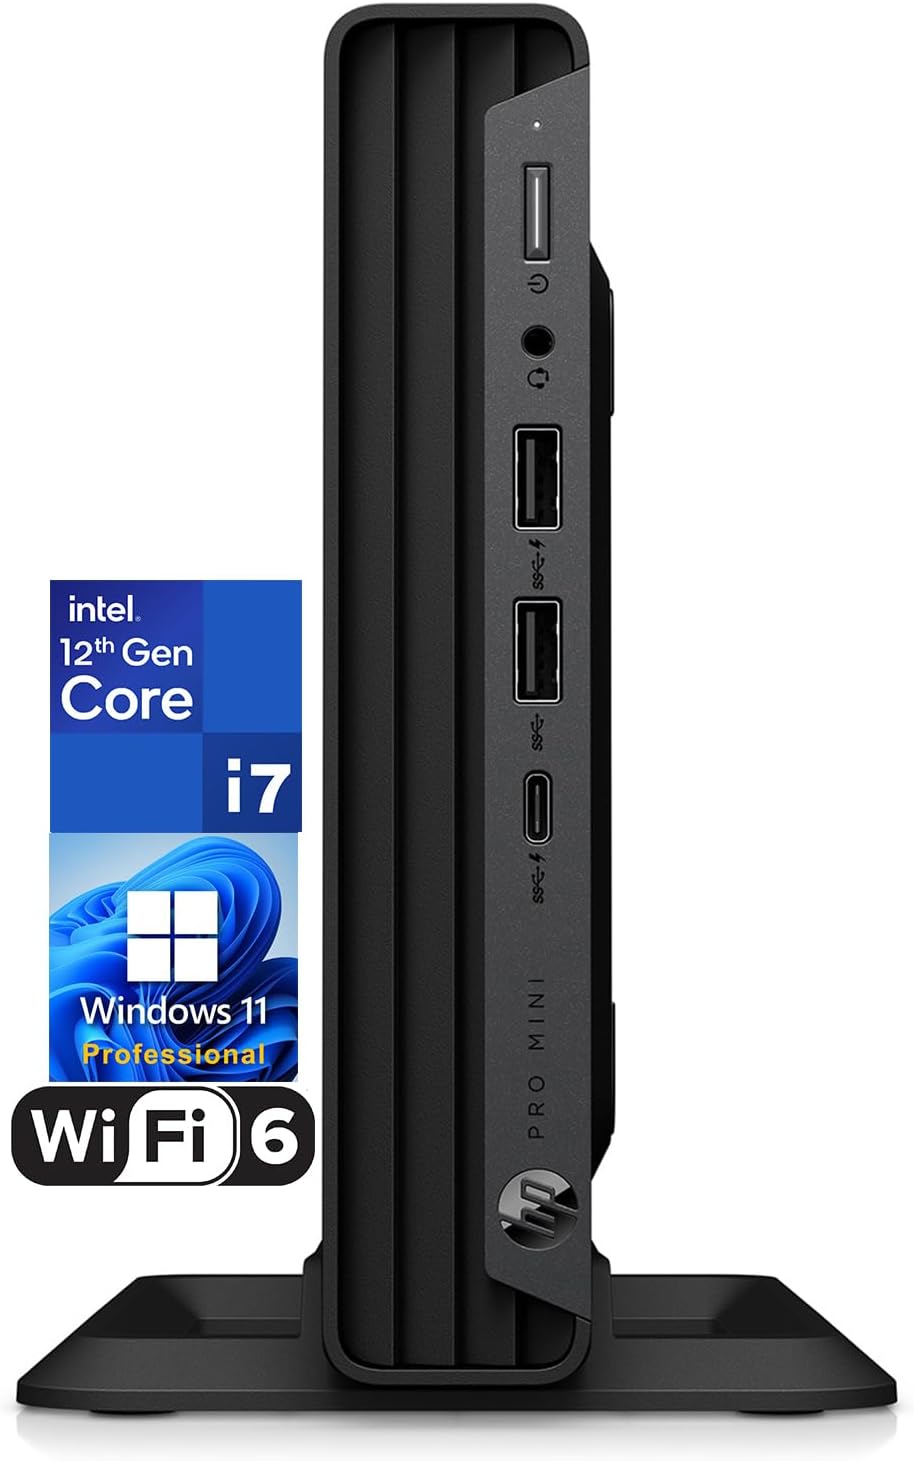 HP ProDesk 400 G9 Mini PC Business Desktop Computer, Intel 12-Core i7-12700T up to 4.7GHz, 64GB DDR4 RAM, 1TB PCIe SSD, WiFi 6, Bluetooth 5.2, Keyboard and Mouse, Windows 11 Pro